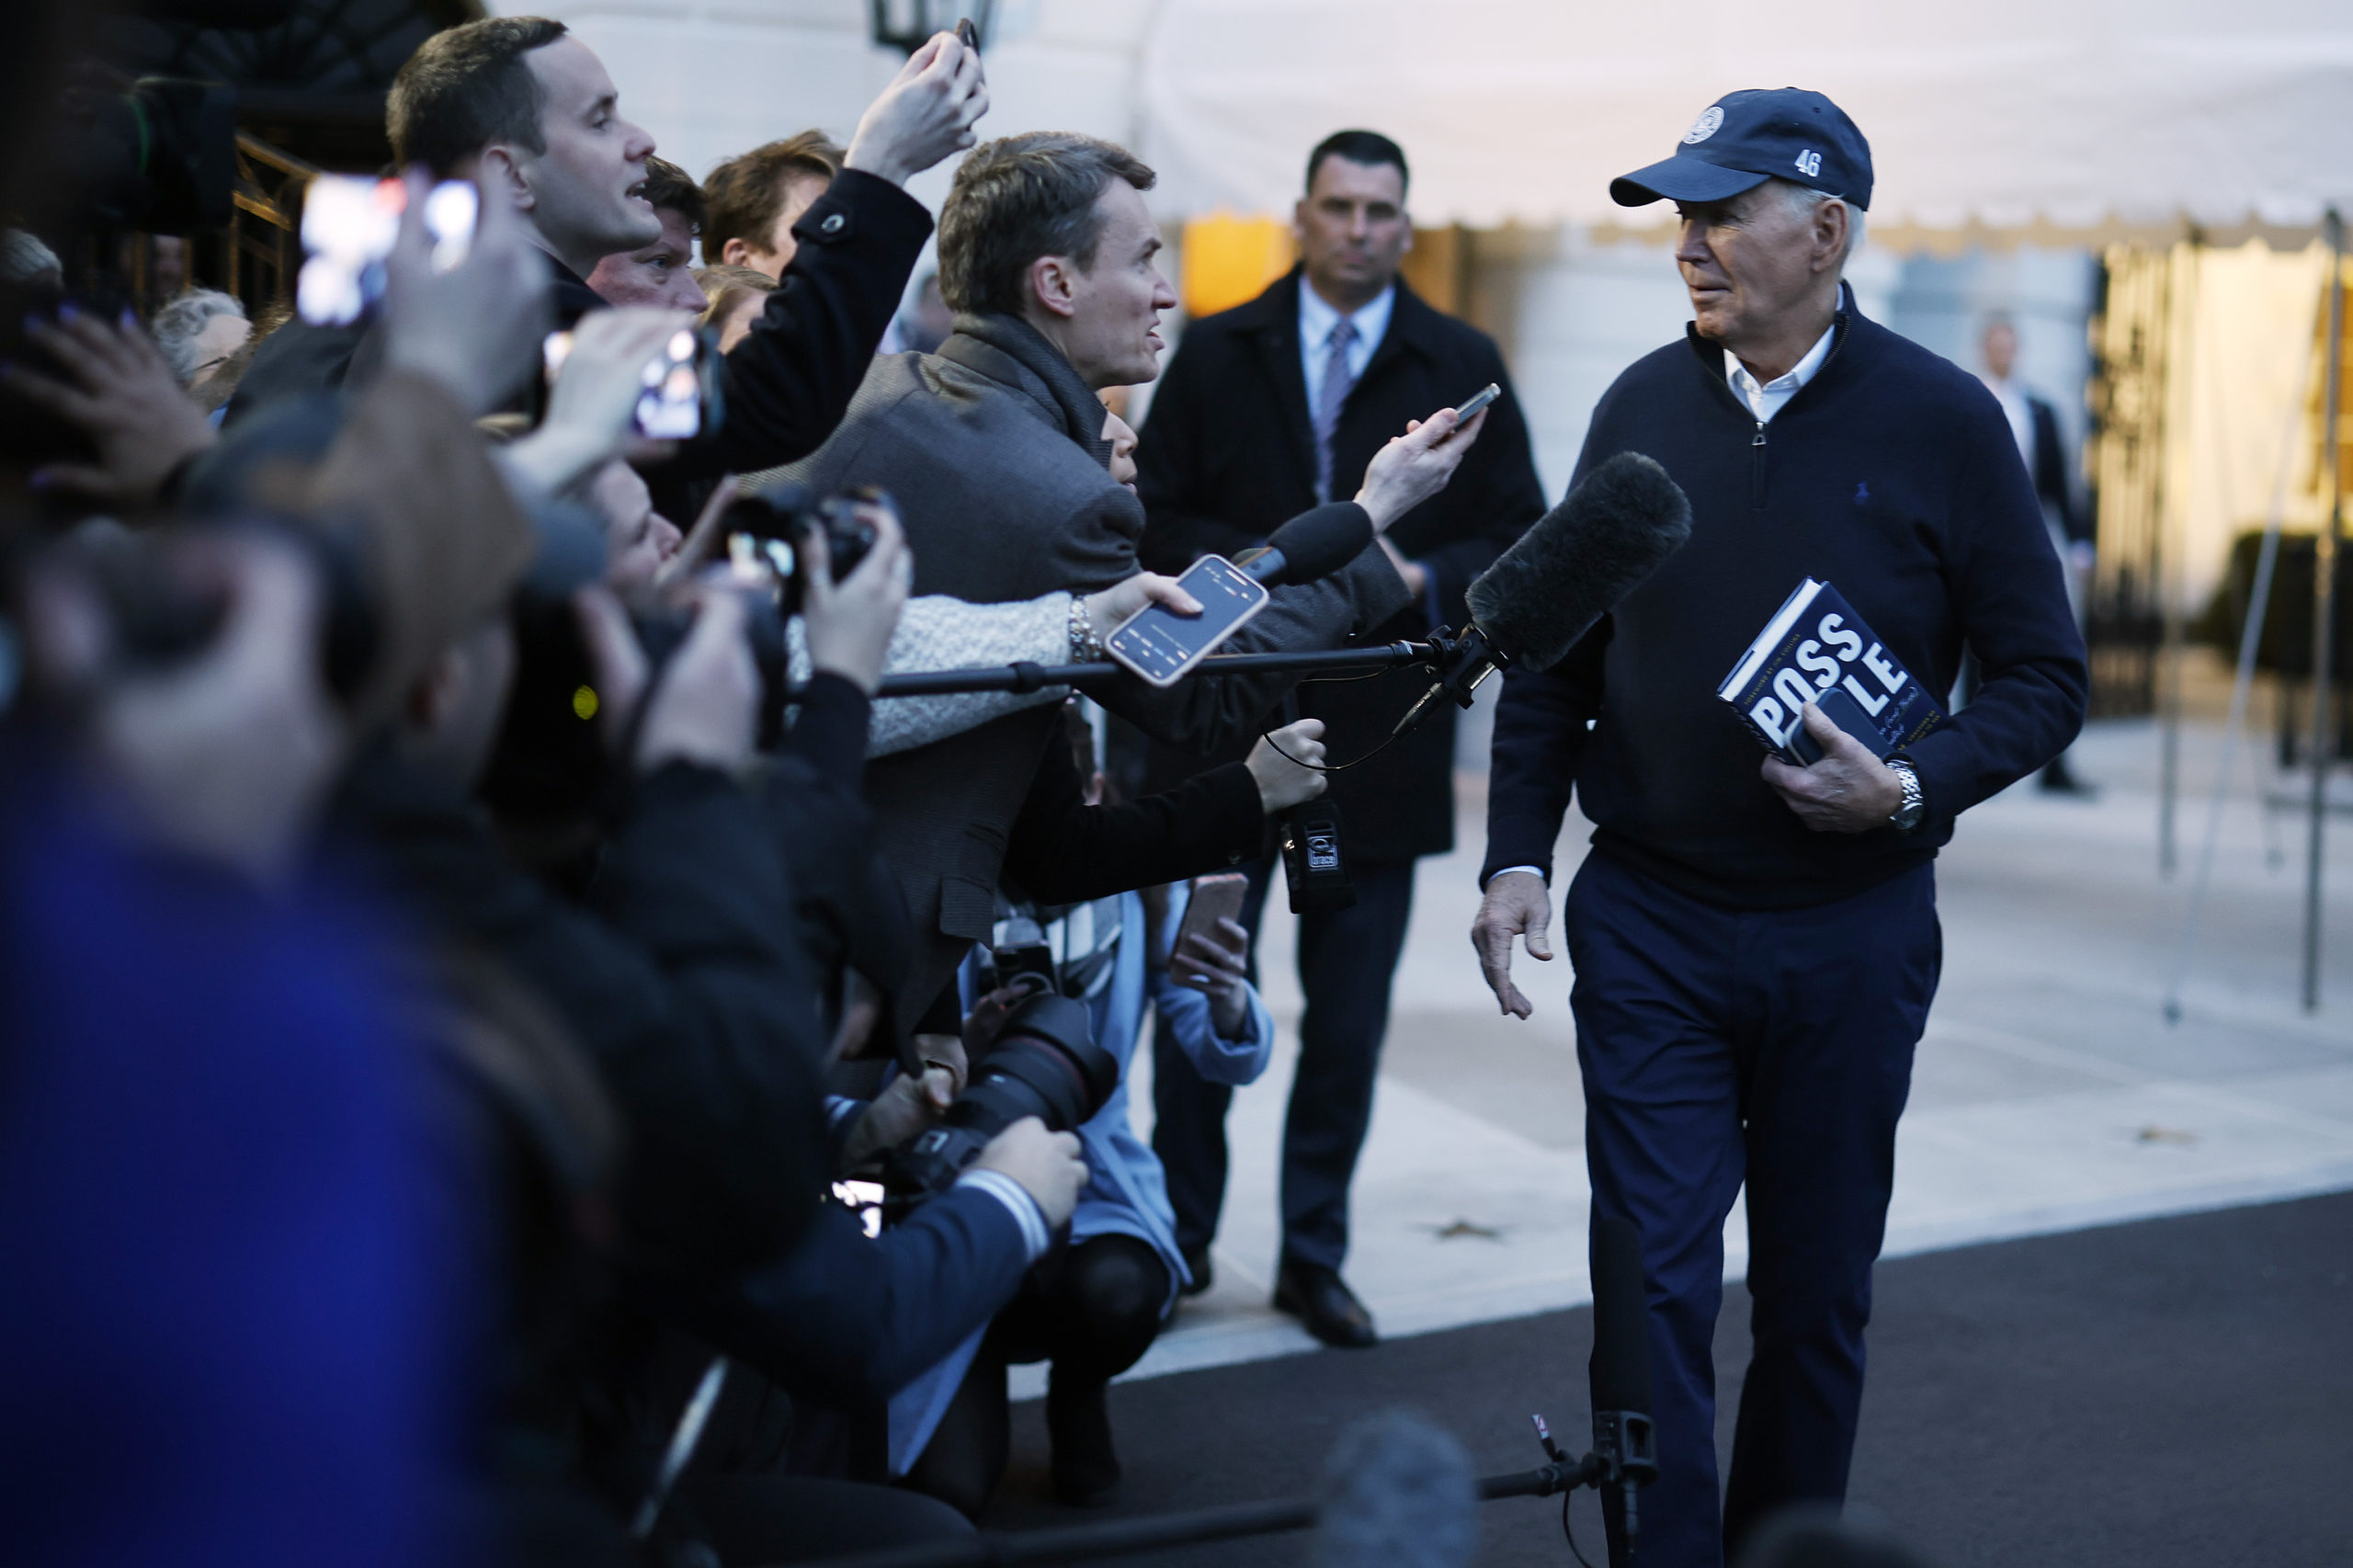 U.S. President Joe Biden stops to talk to reporters as he departs the White House on March 01, 2024 in Washington, DC. Biden will spend the weekend at Camp David, where he will prepare for his State of the Union address scheduled for March 07. (Photo by Chip Somodevilla/Getty Images)